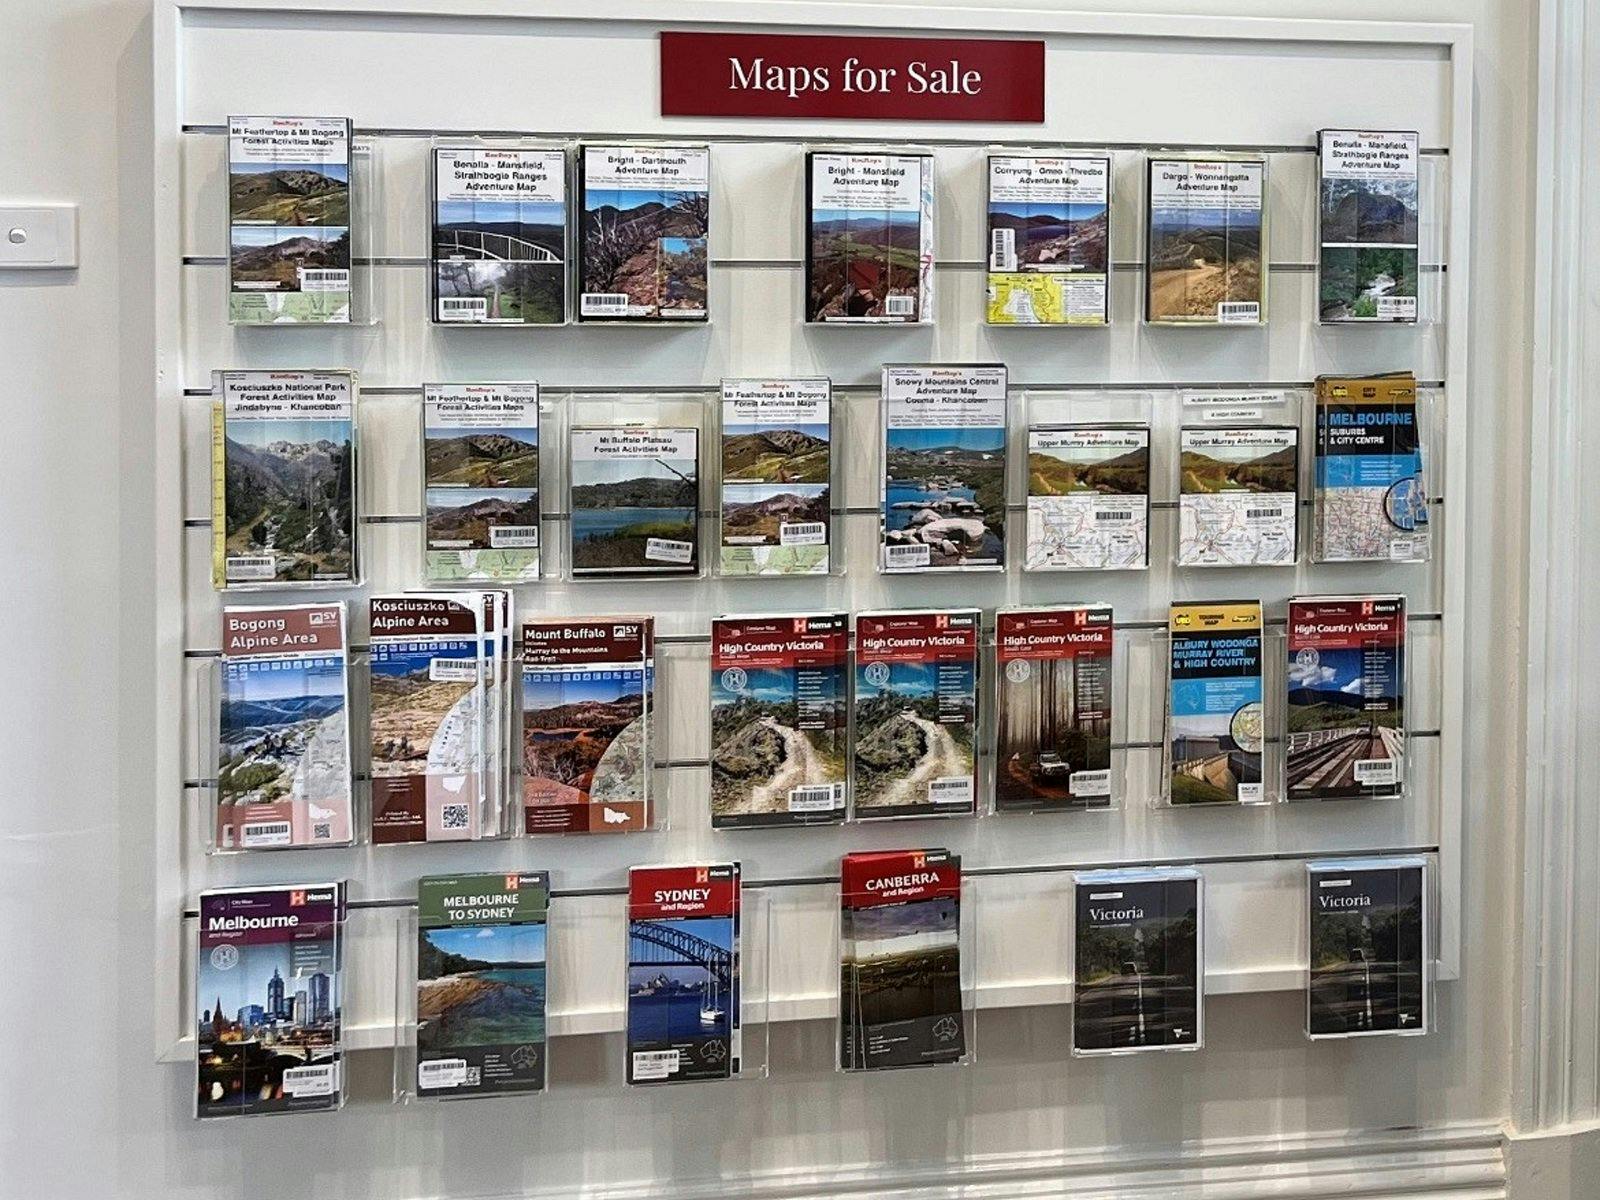 various maps for sale, displayed on the wall in clear racks